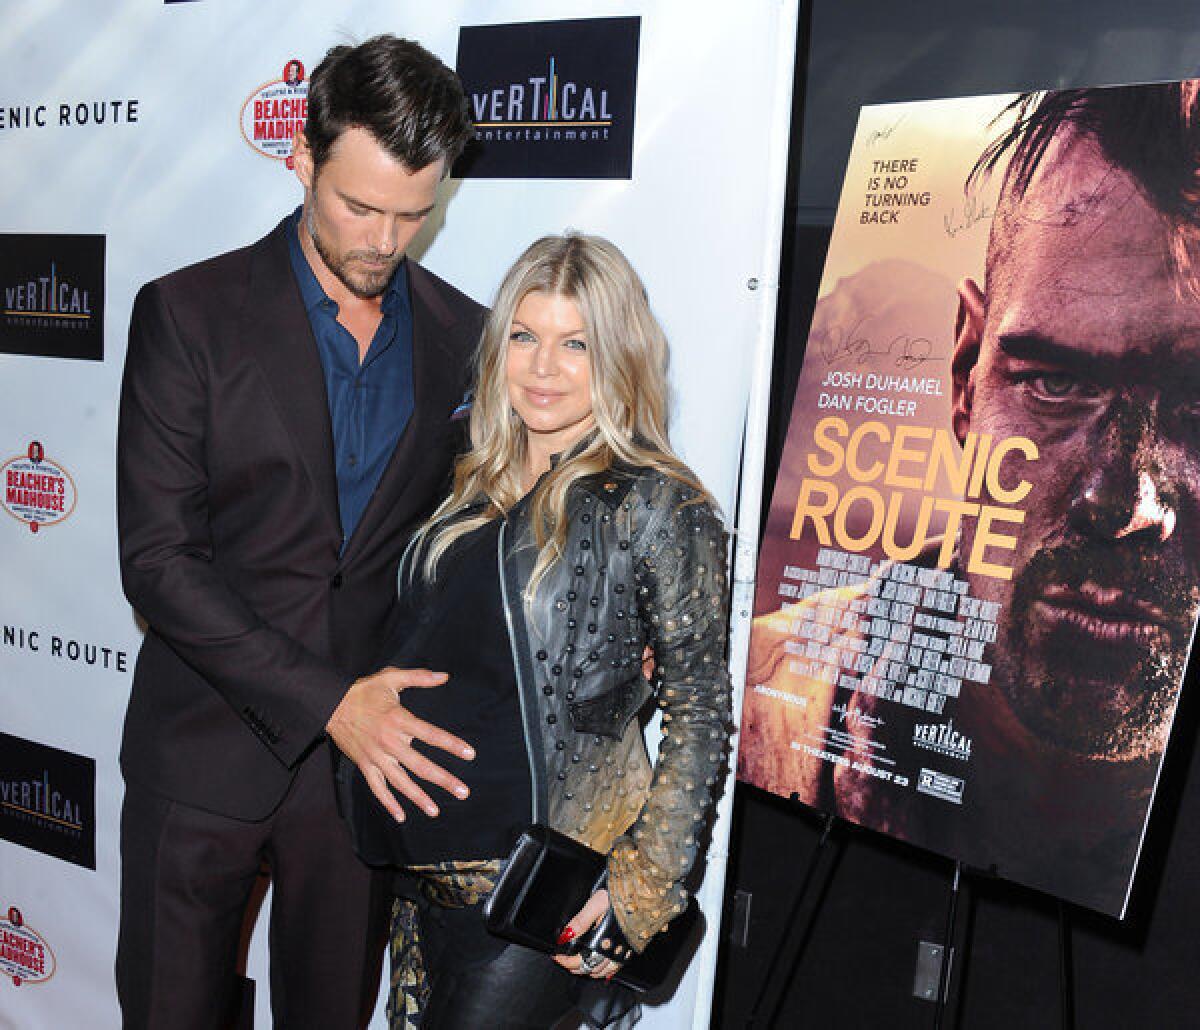 Josh Duhamel and his wife Fergie arrive on the red carpet for the premiere of "Scenic Route" in Los Angeles.